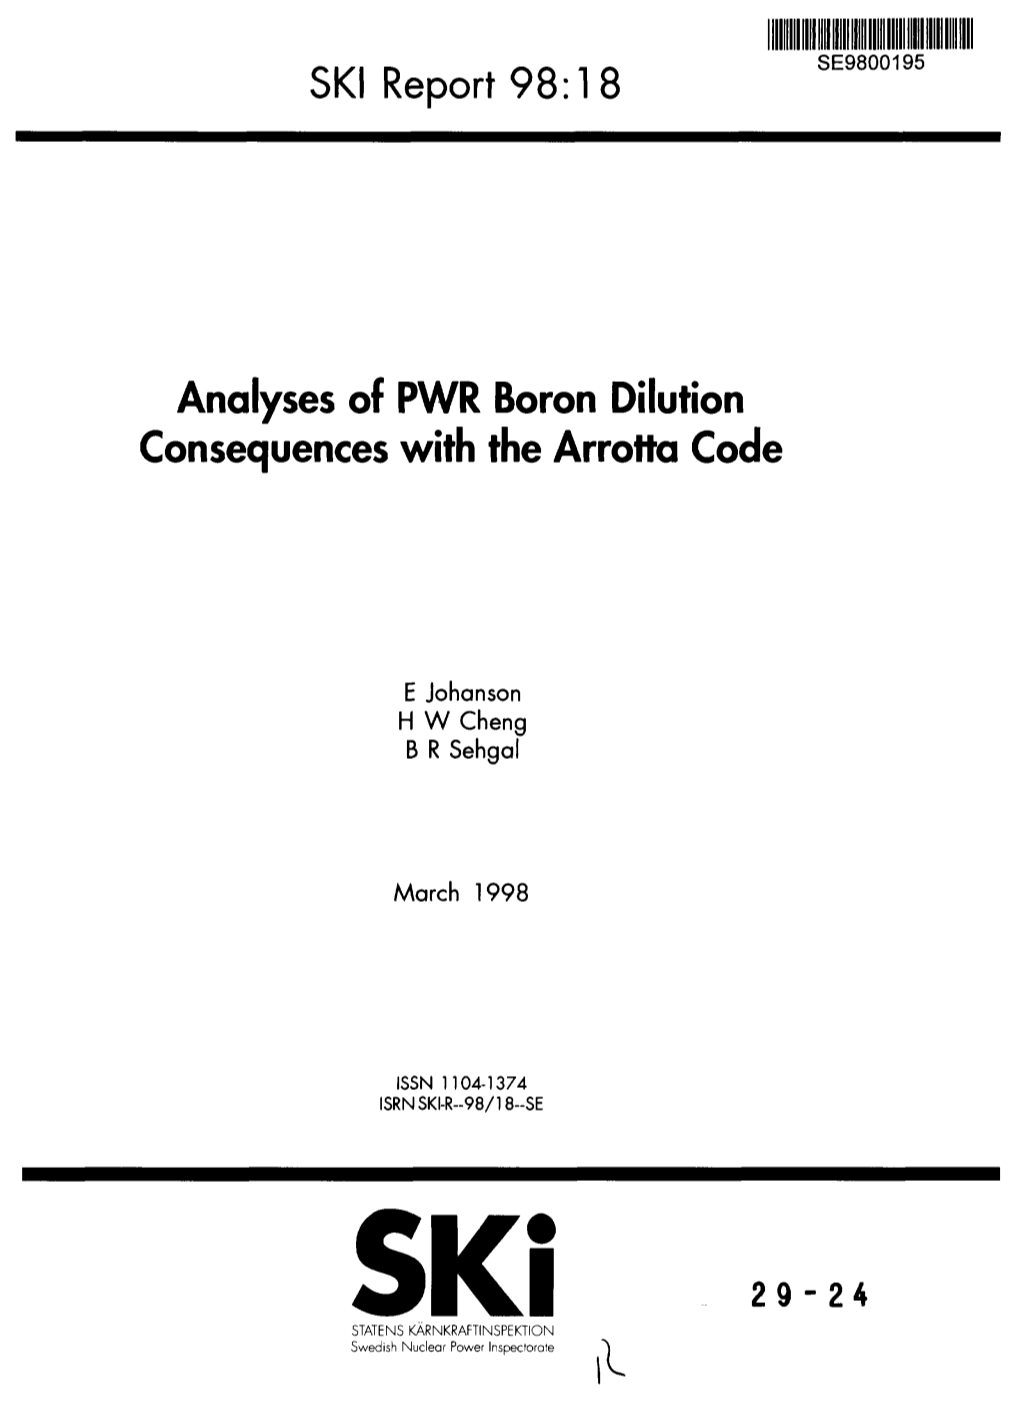 Analyses of PWR Boron Dilution Consequences with the Arrotta Code